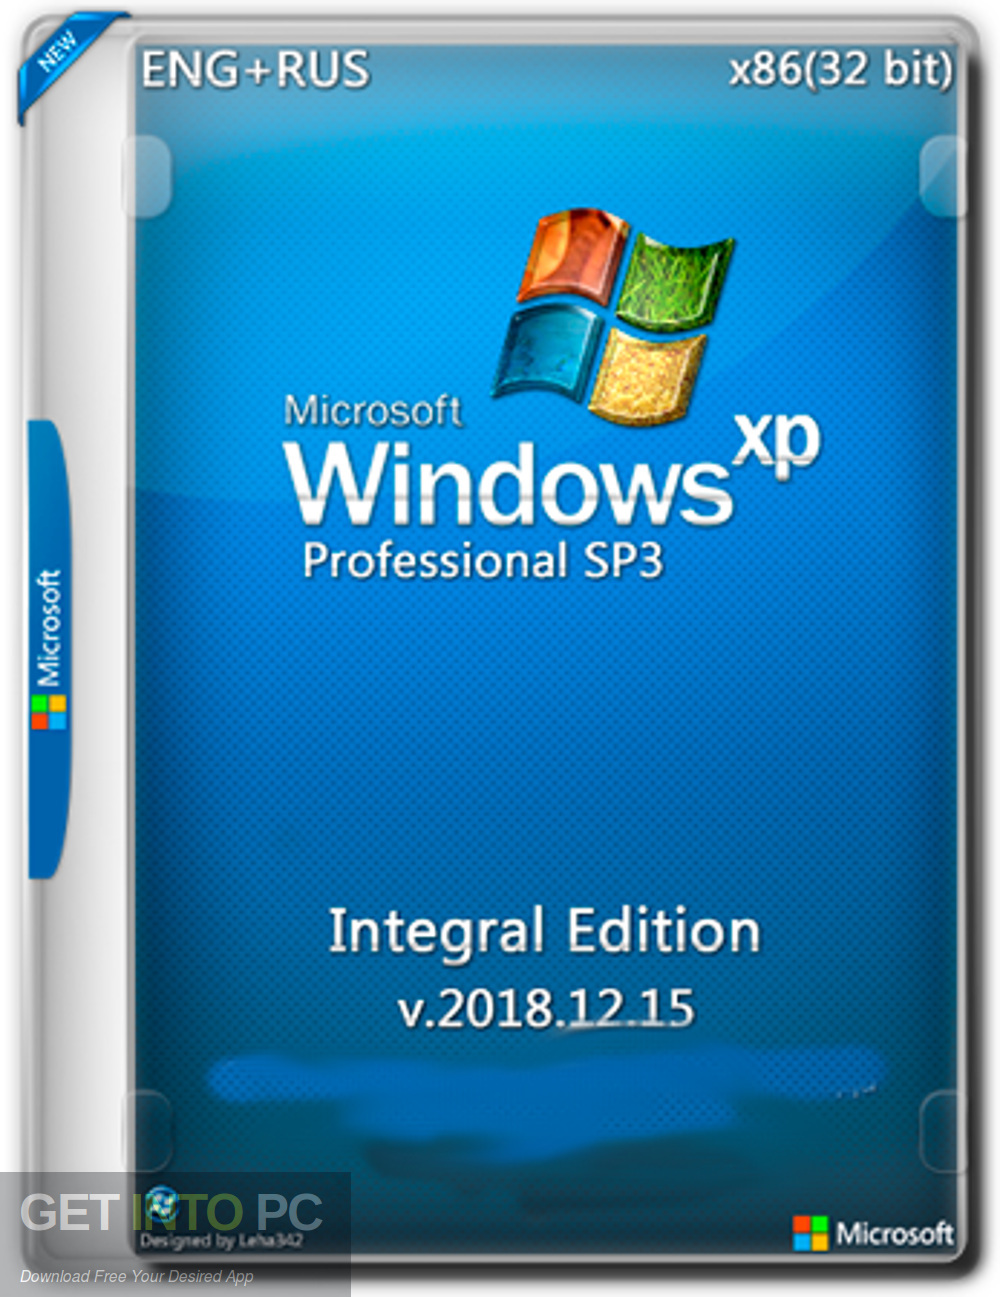 Windows xp sp3 iso download free